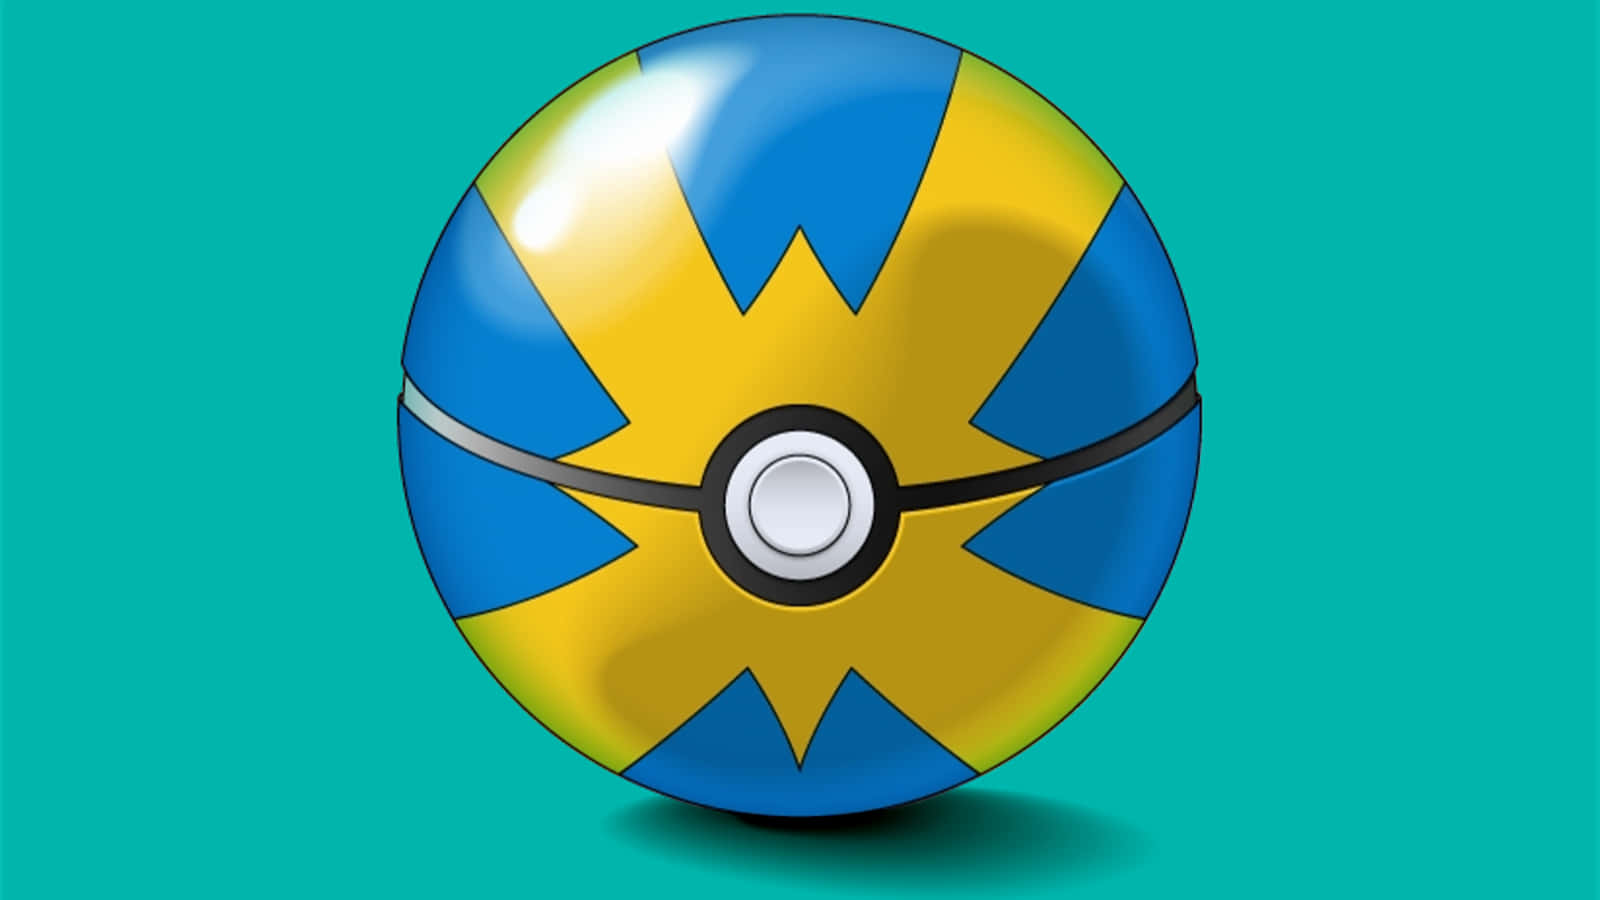 Fall in Love with the Classic "Poke Ball"